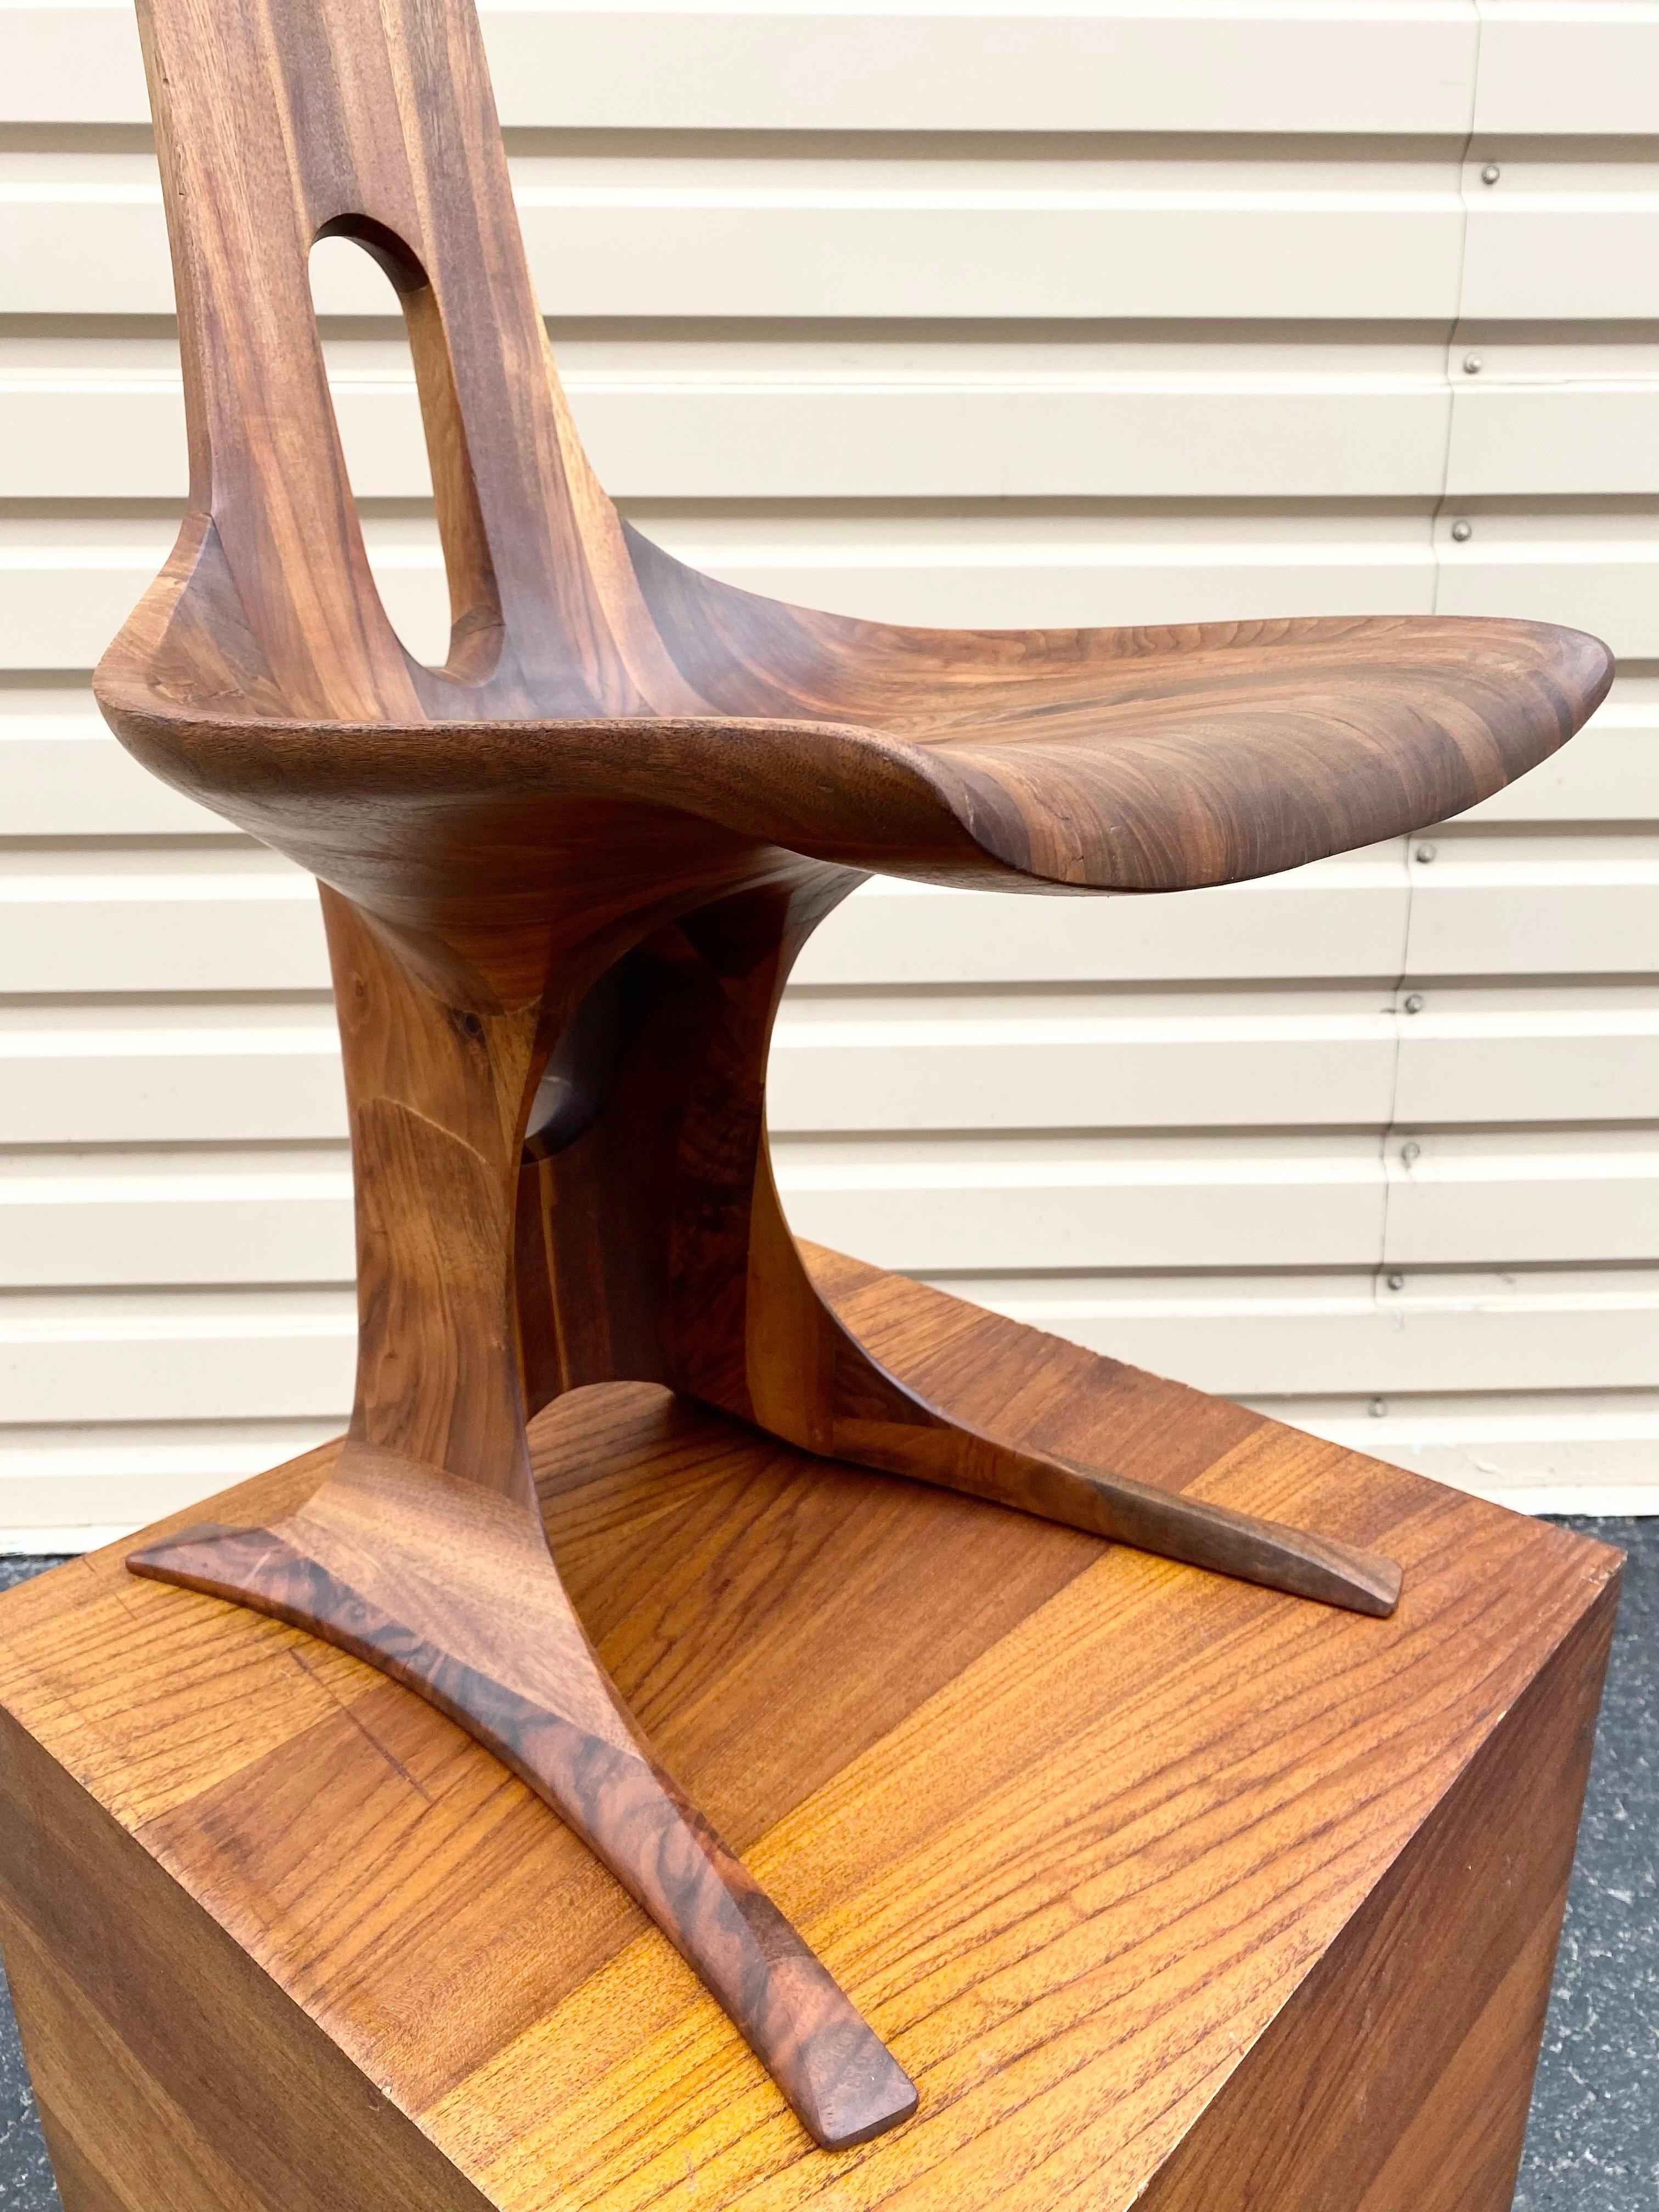 Modernist Sculptural Walnut Chair by Edward G. Livingston for Archotypo (1970) For Sale 2